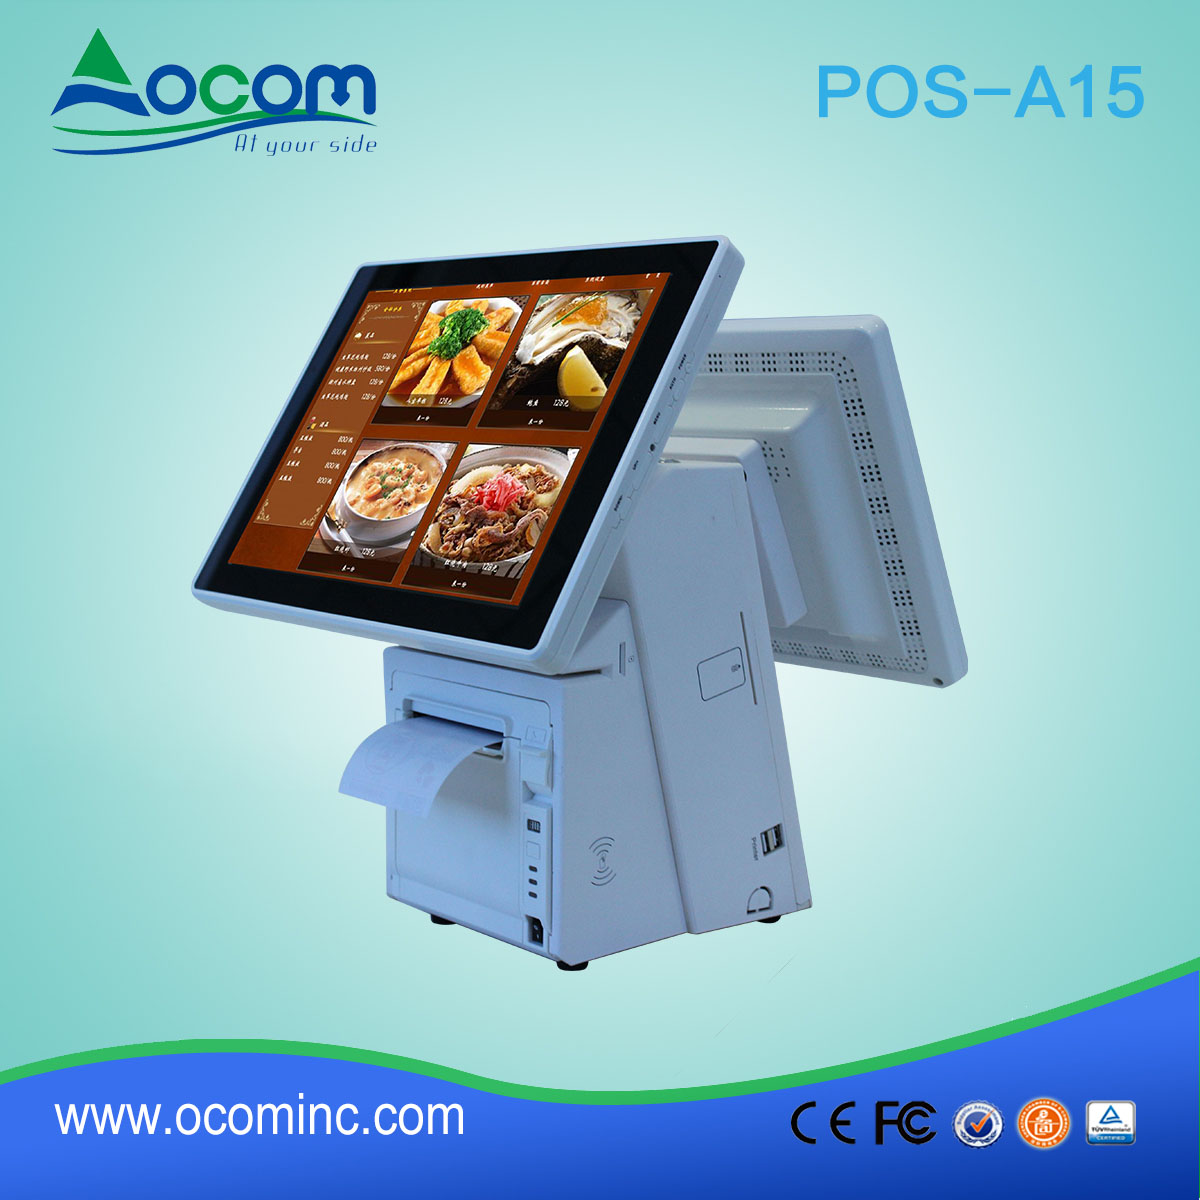 Windows Point of Sales alle in One Touch Screen POS